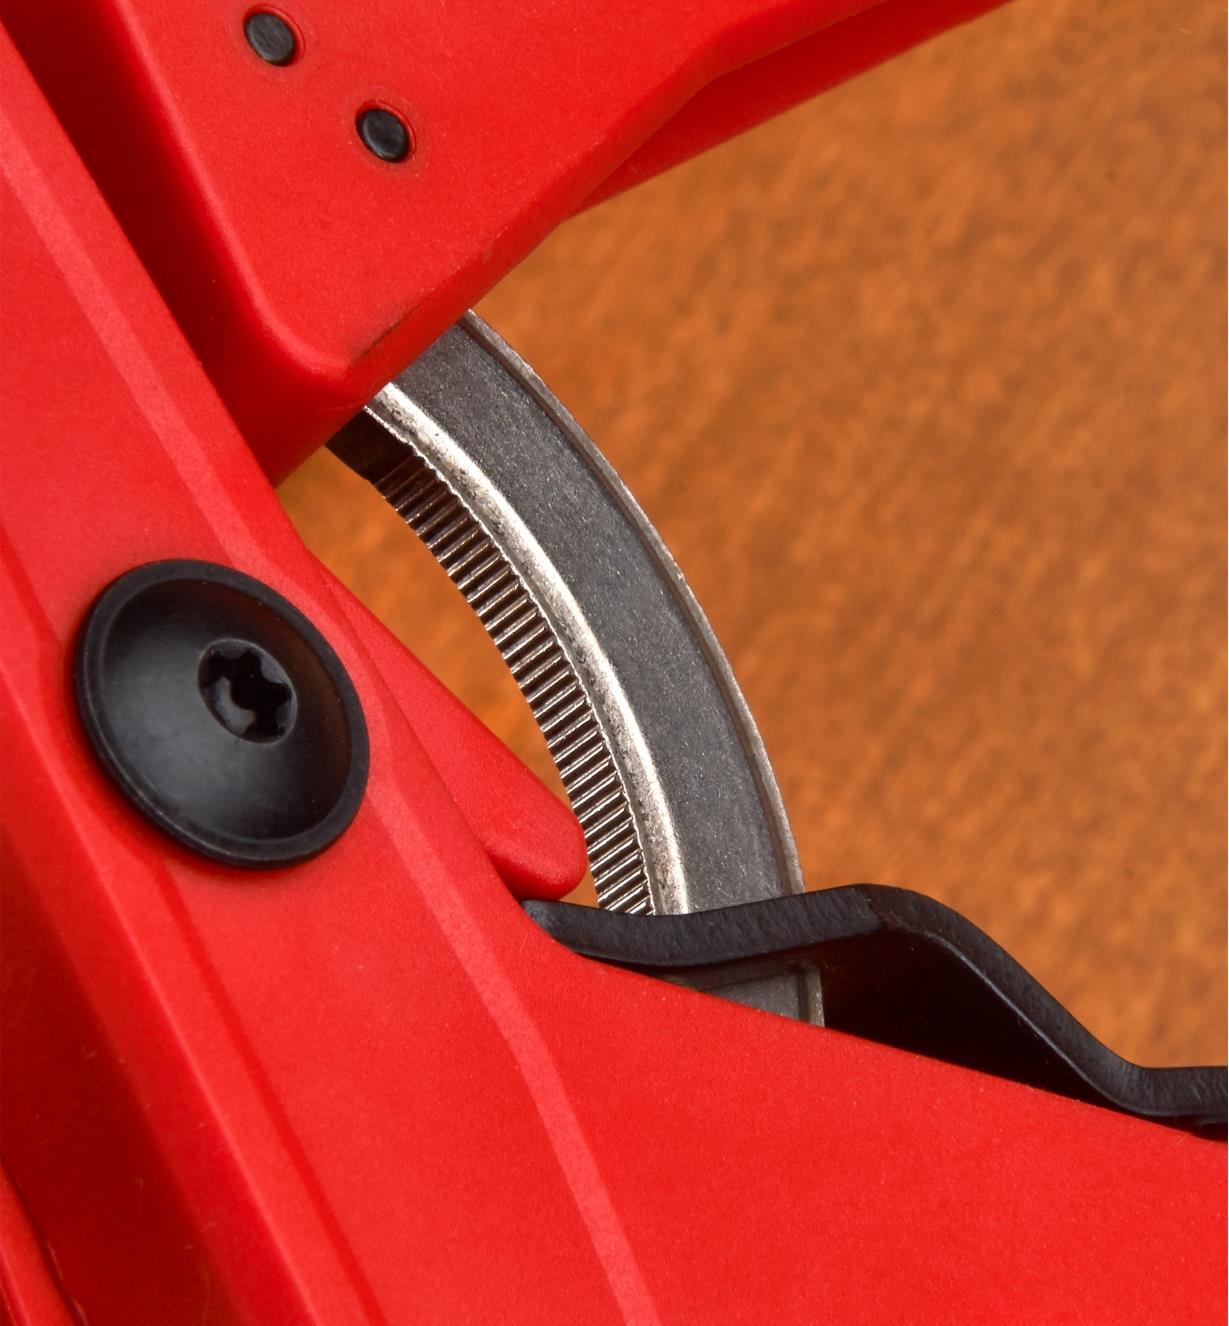 A close-up view of the steel lock-up/quick-release mechanism on a ratcheting clamp